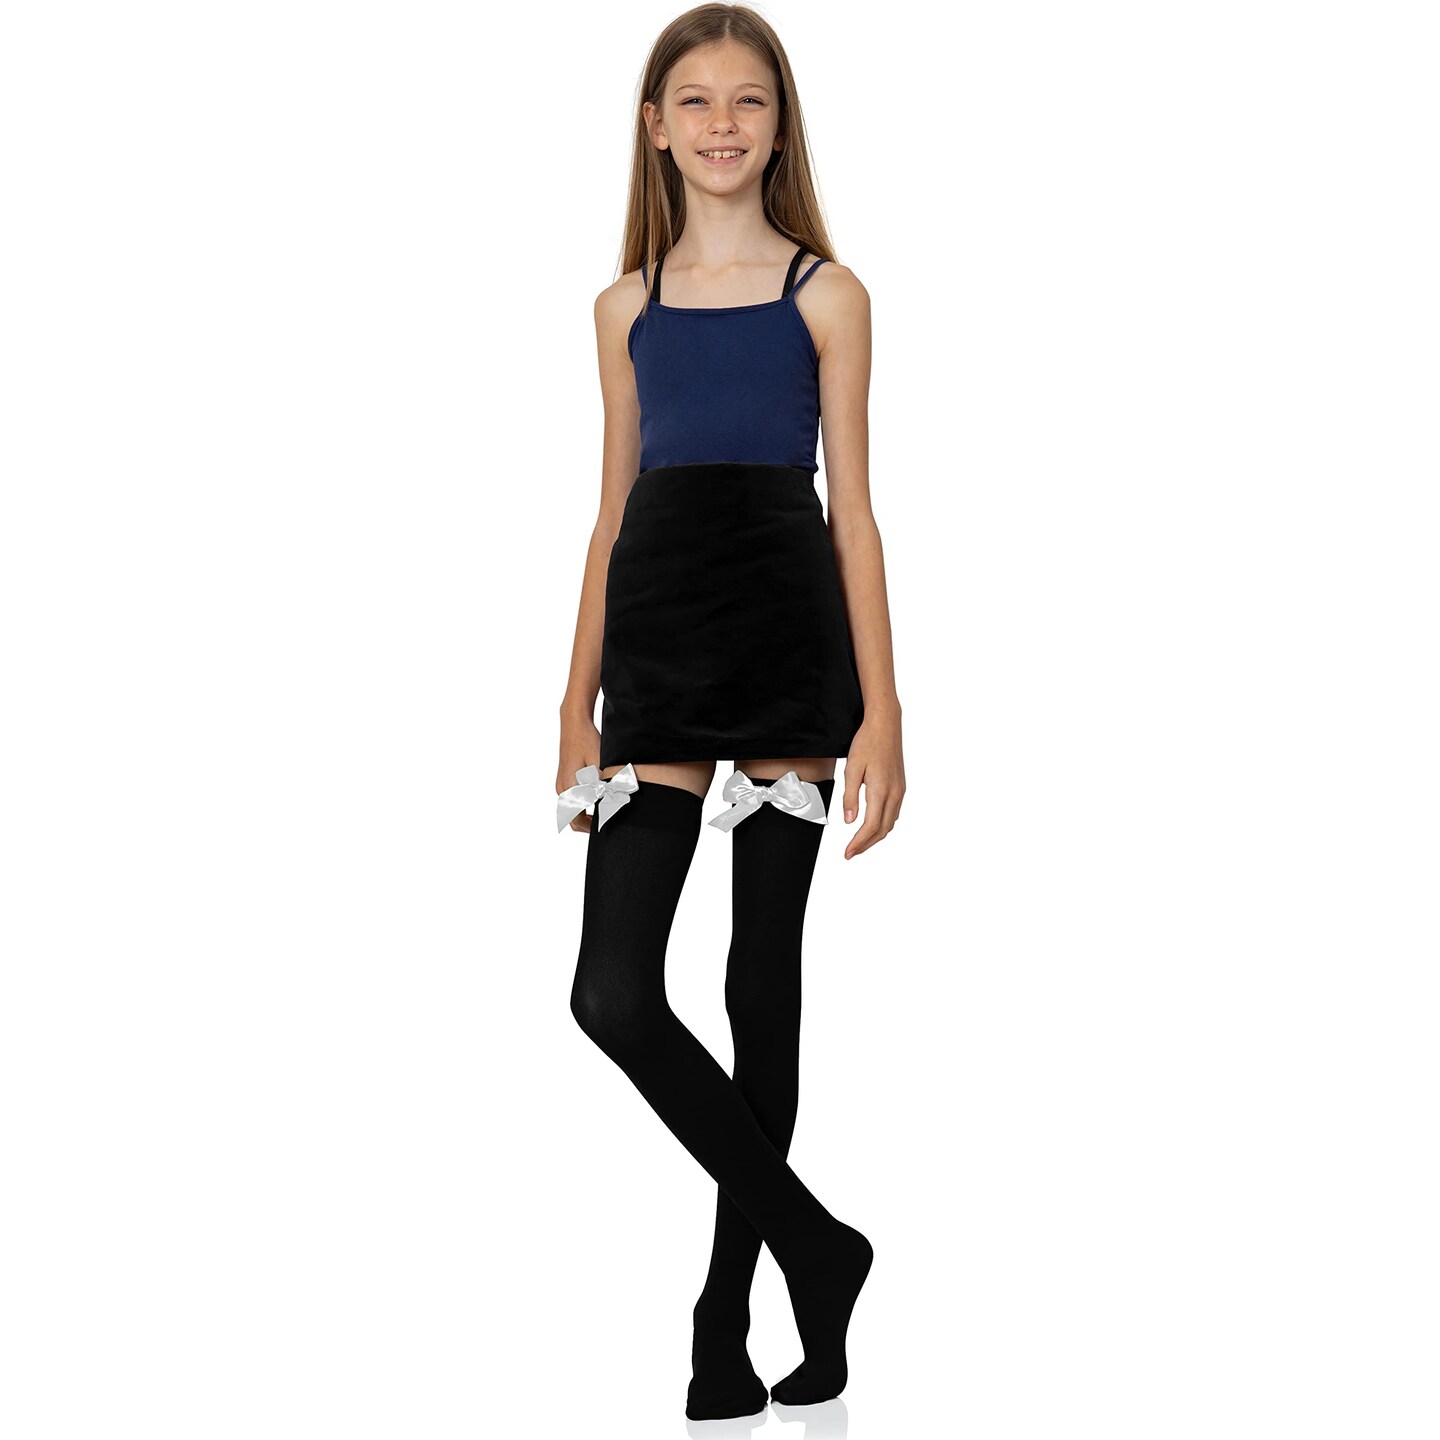 Bow Accent Thigh Highs Black Over The Knee High Stockings With White